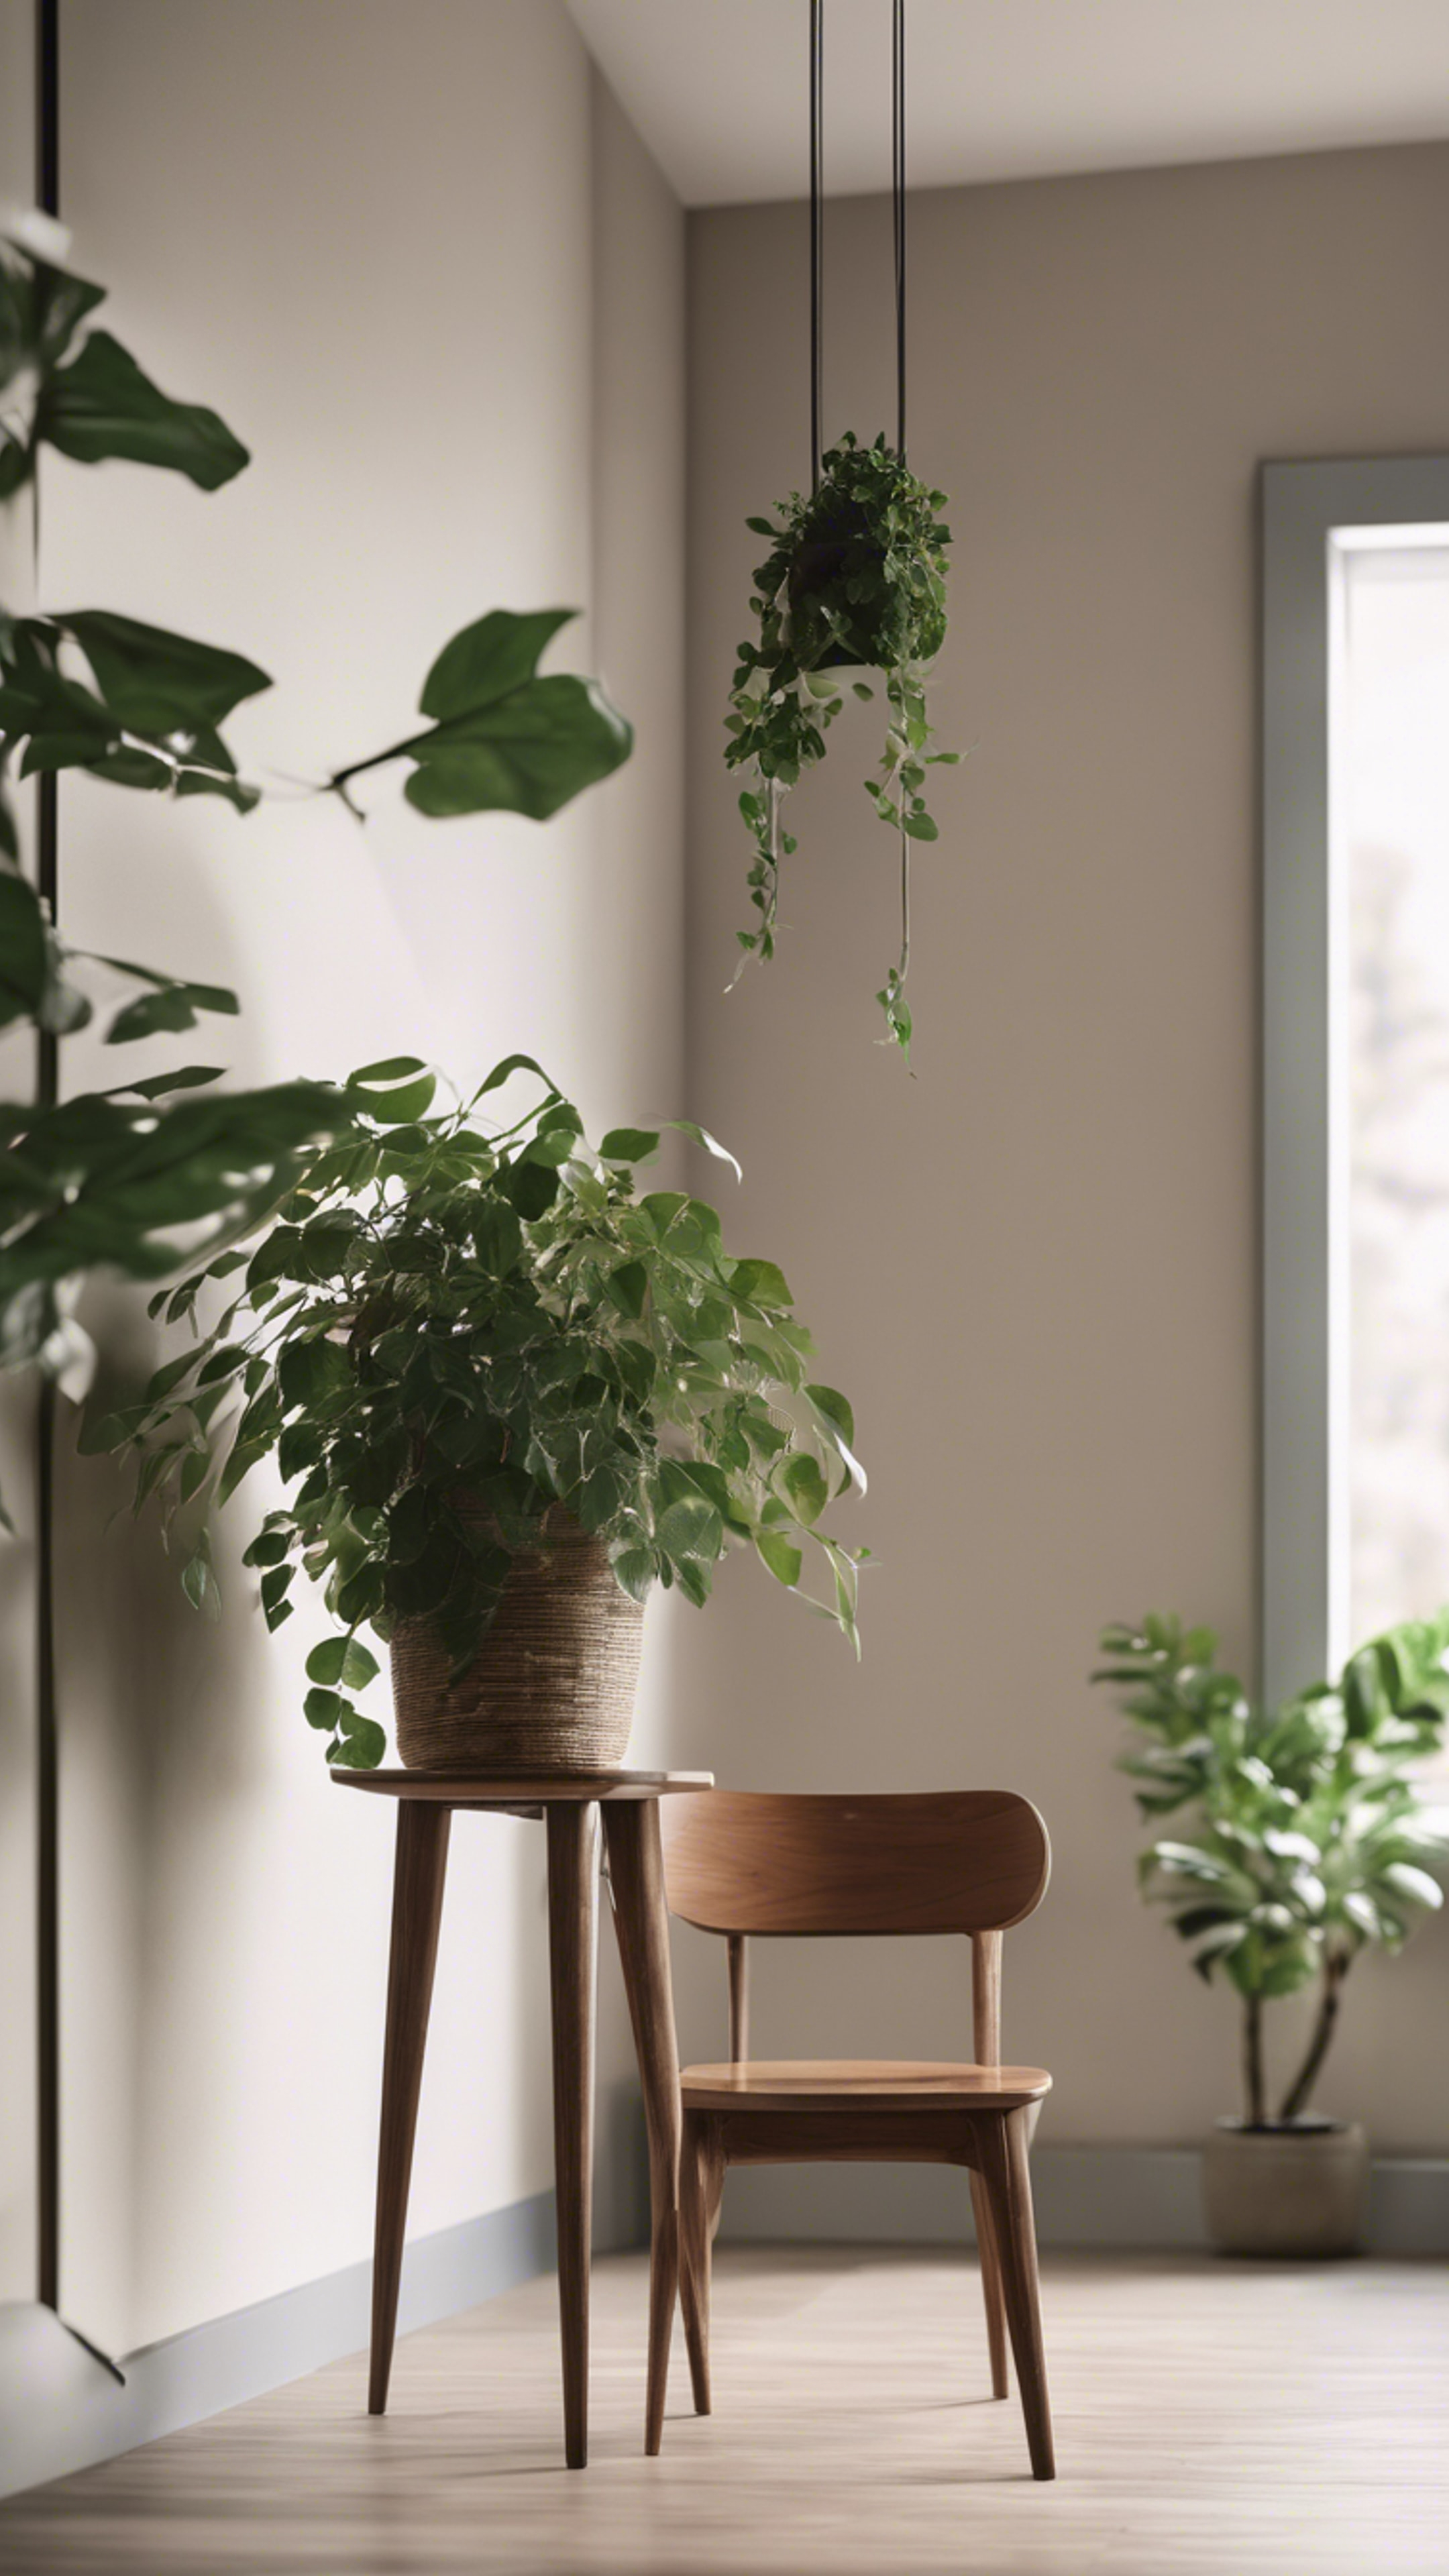 The corner of a minimalist room, featuring a hanging plant and a low, wooden side table. Fond d'écran[20a0de2ec9c541069b04]